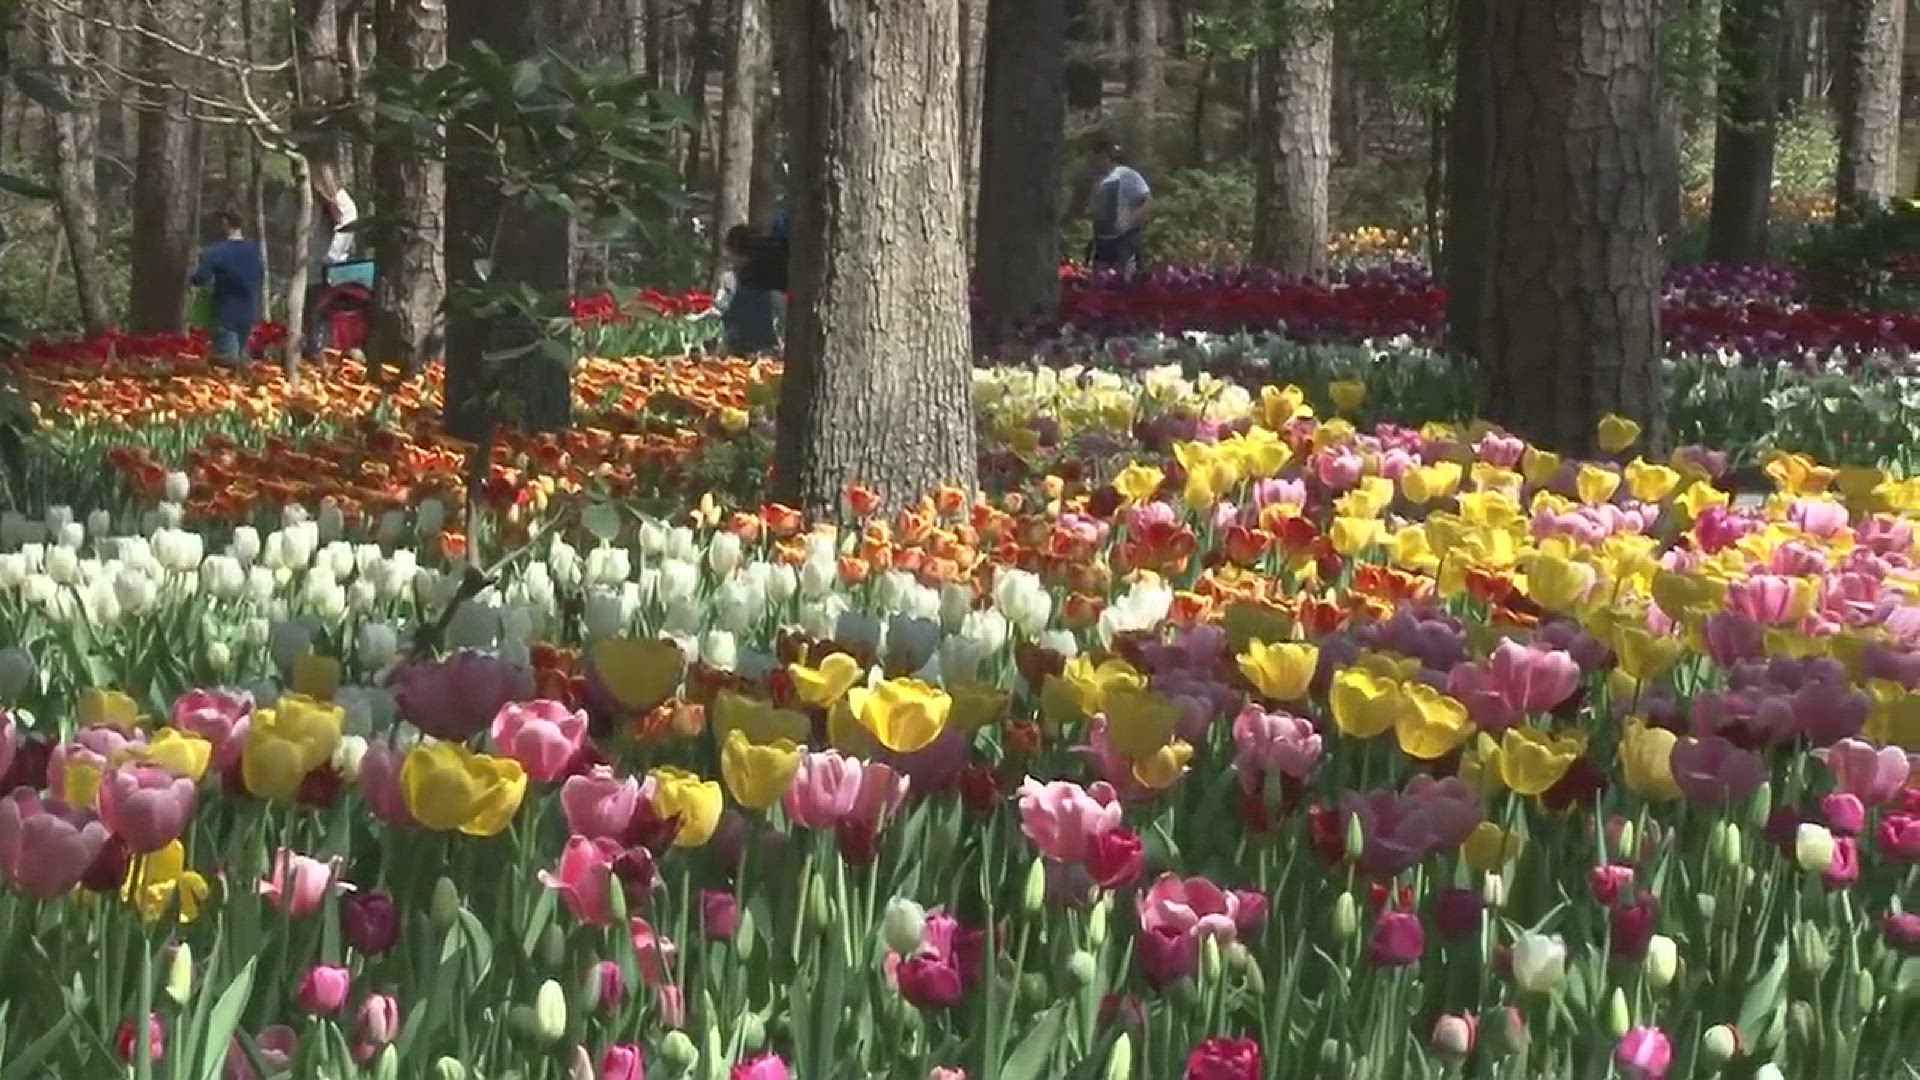 Fall in love with the tulips at Garvan Woodland Gardens